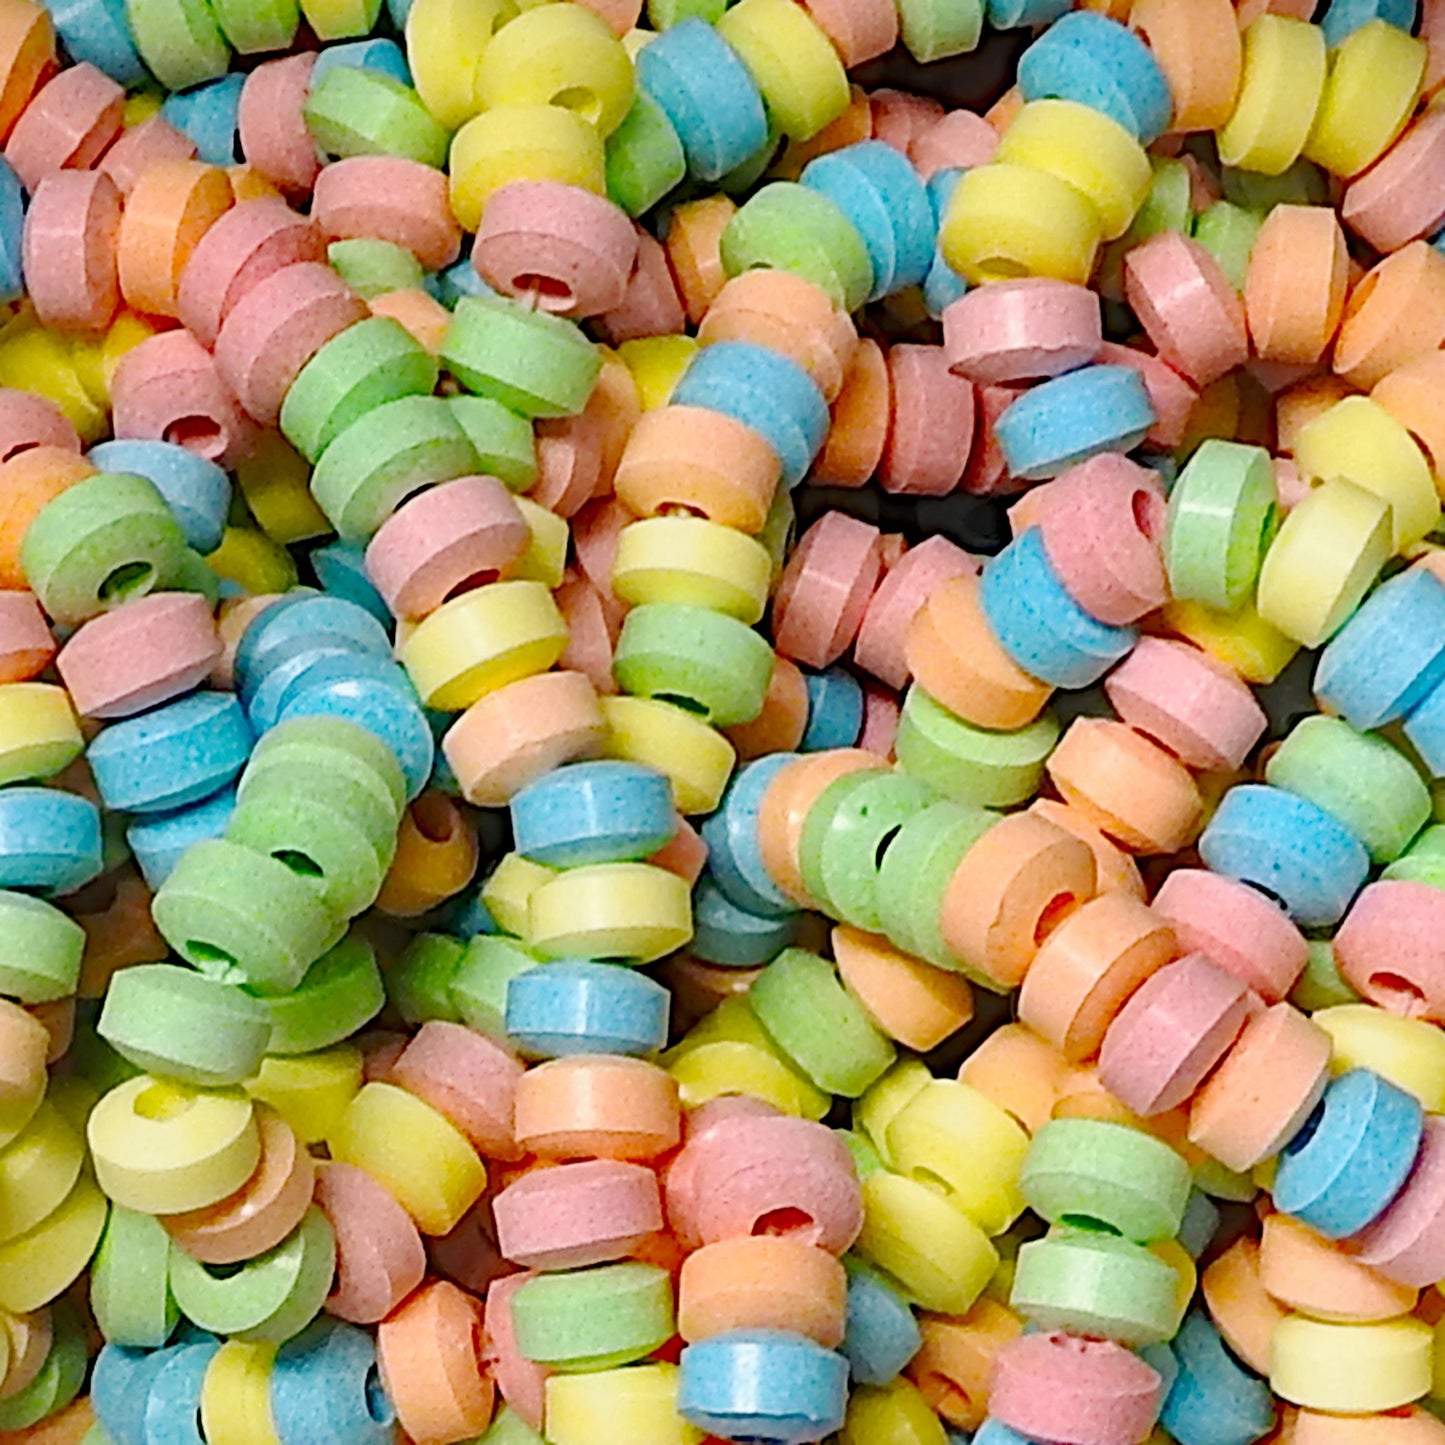 Candy Necklaces - Retro Sweets at The Sweetie Jar